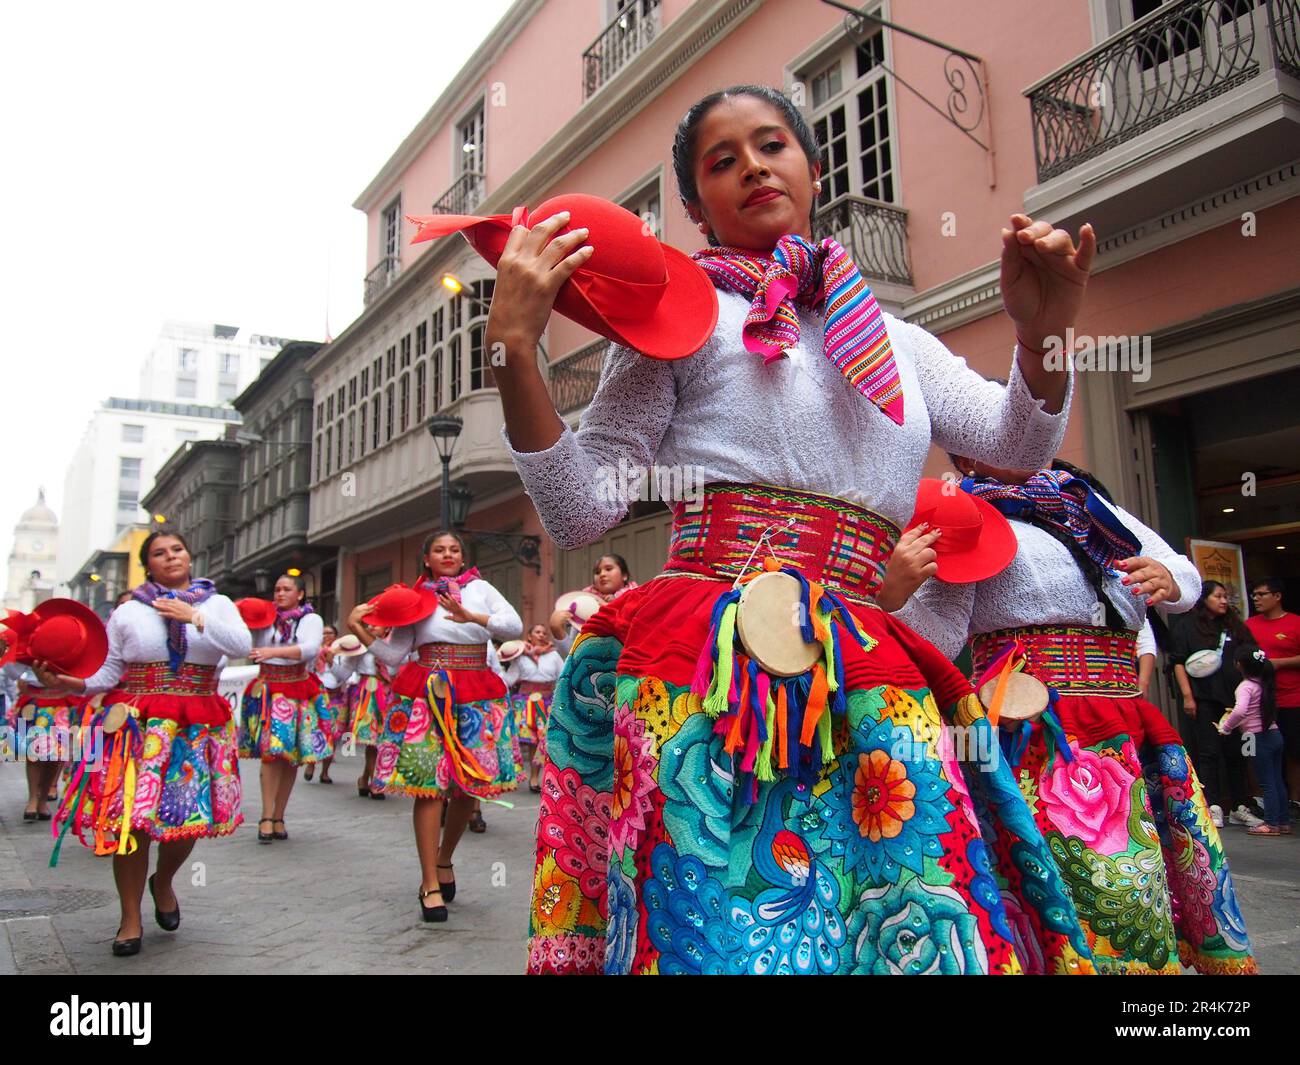 Lima, Peru. 28th May, 2023. Women in traditional costumes dancing in the streets when Peruvian Indigenous folk dancers and Andean devotees wearing traditional costumes took to the streets of Lima downtown again to celebrate the Pentecost day. Pentecost is the Christian feast of the fiftieth day of Easter time that sets the solemn culmination of Easter itself. Credit: Fotoholica Press Agency/Alamy Live News Stock Photo